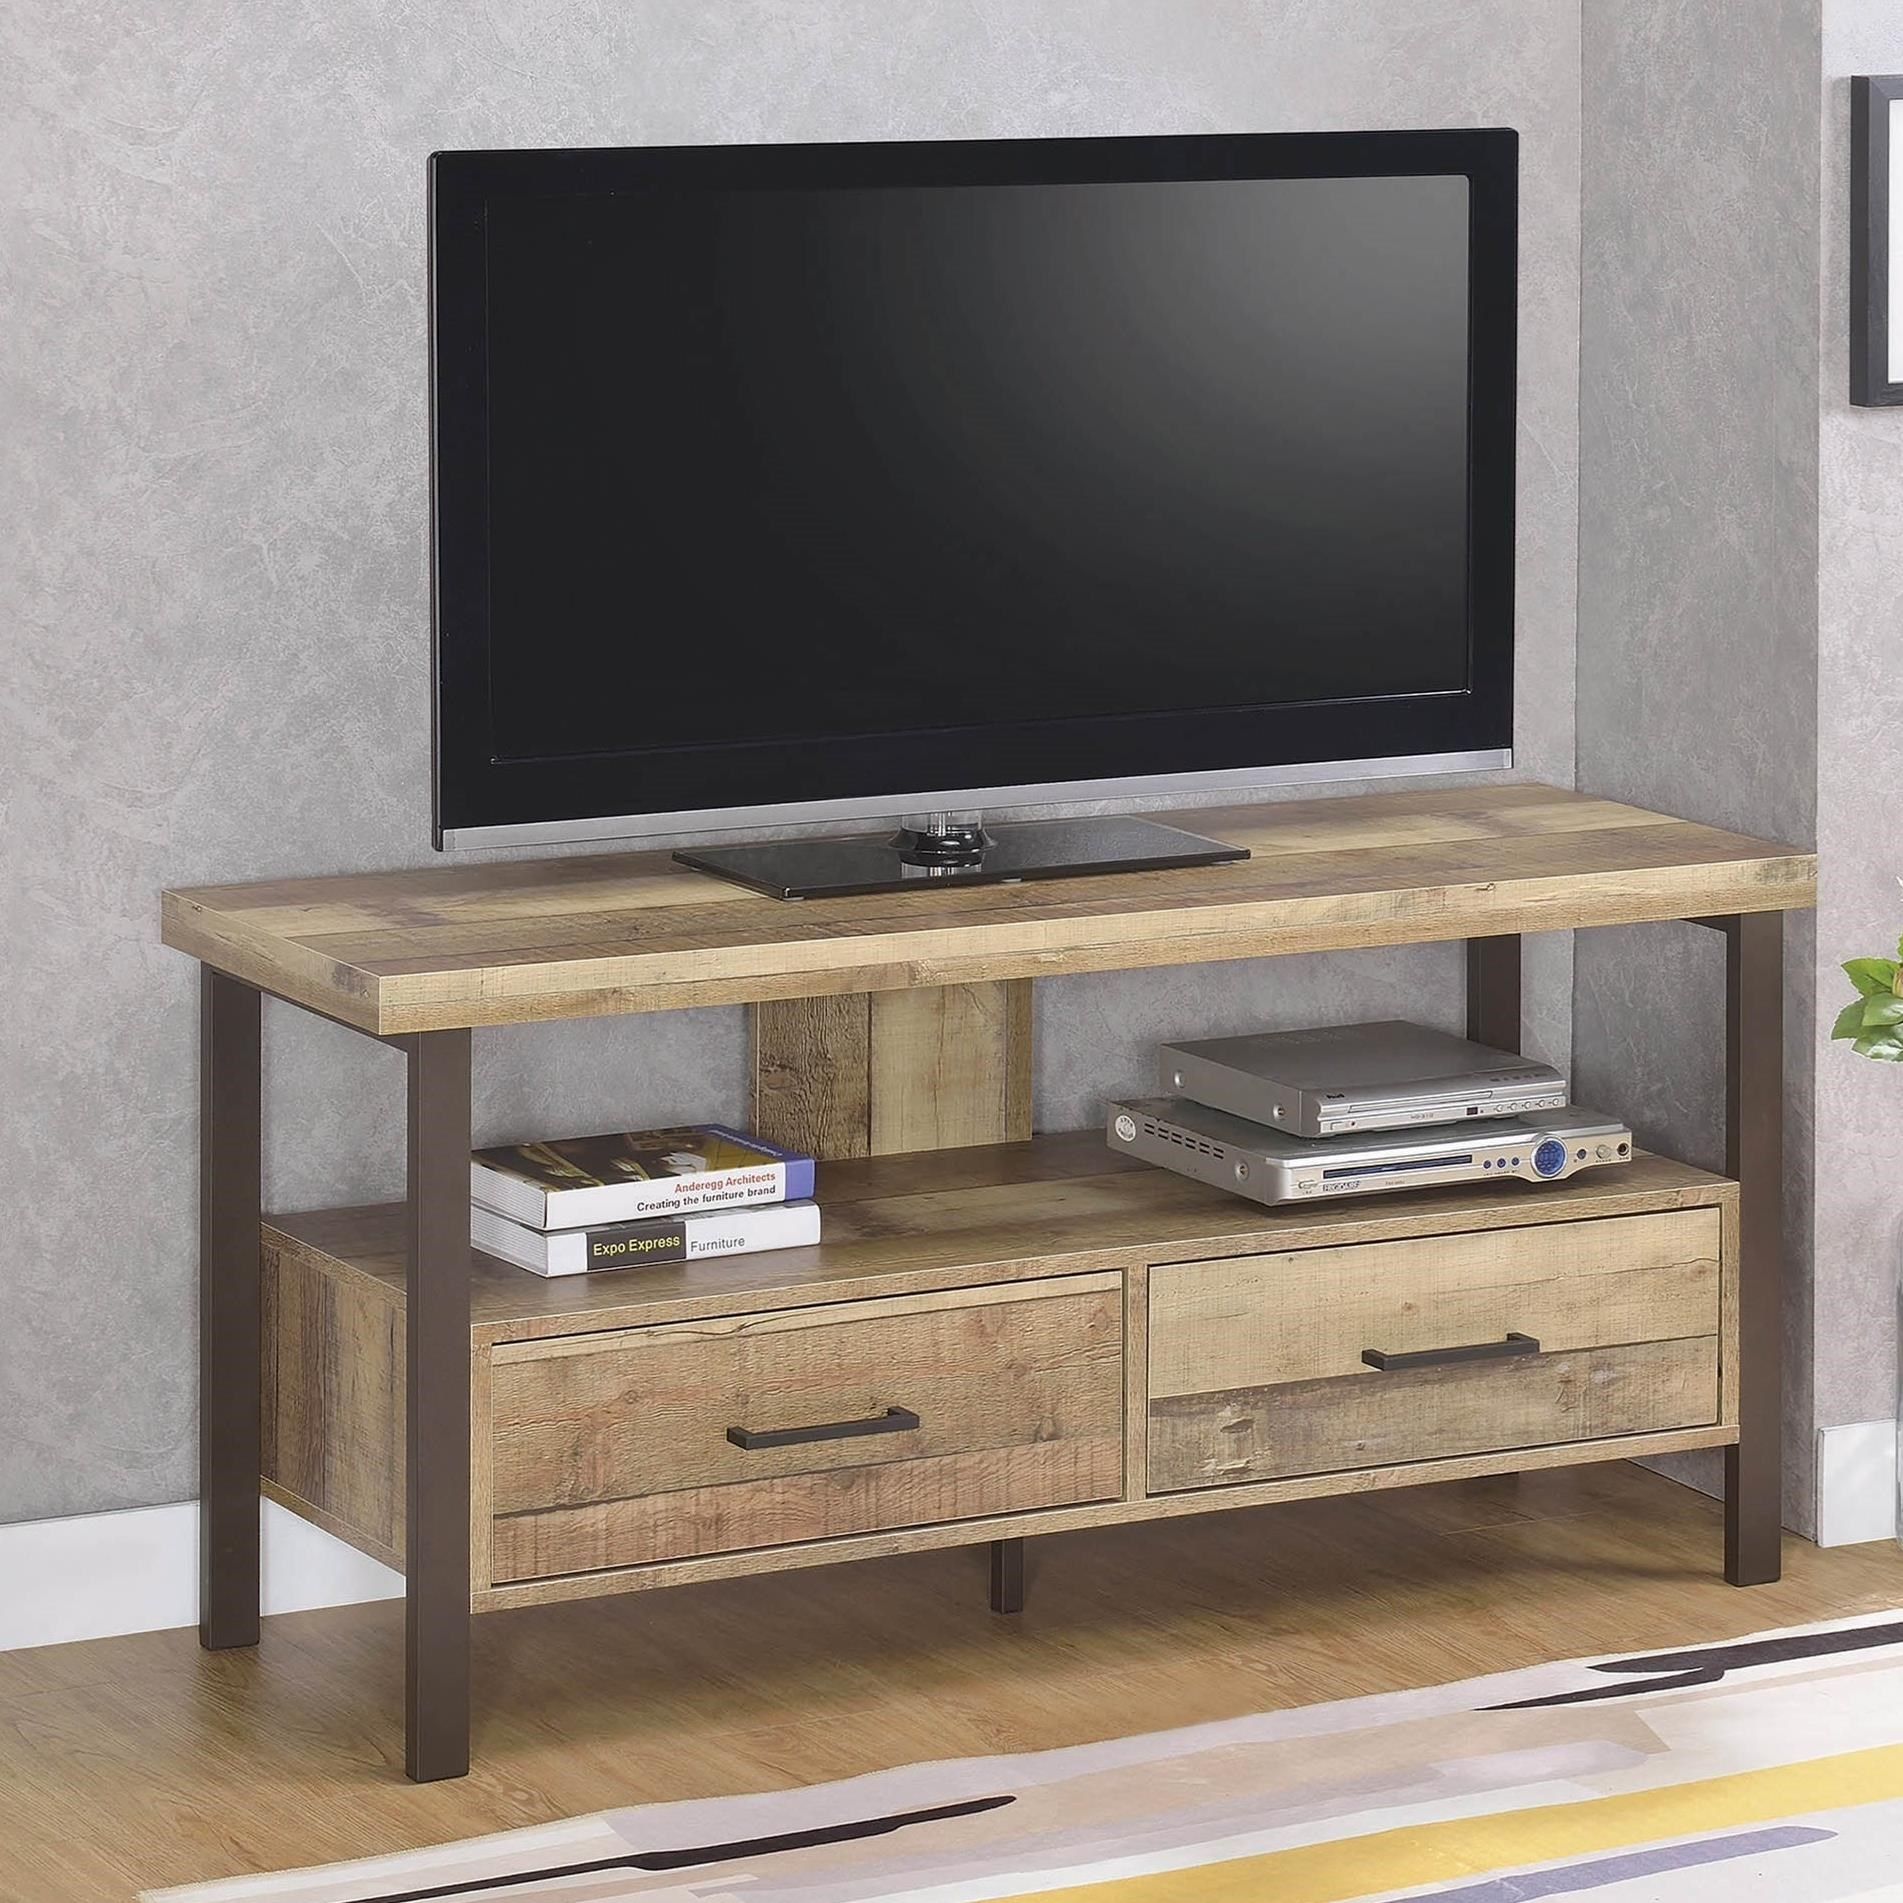 Coaster Tv Stands Industrial 48" Tv Stand | A1 Furniture With Industrial Tv Stands (View 10 of 15)